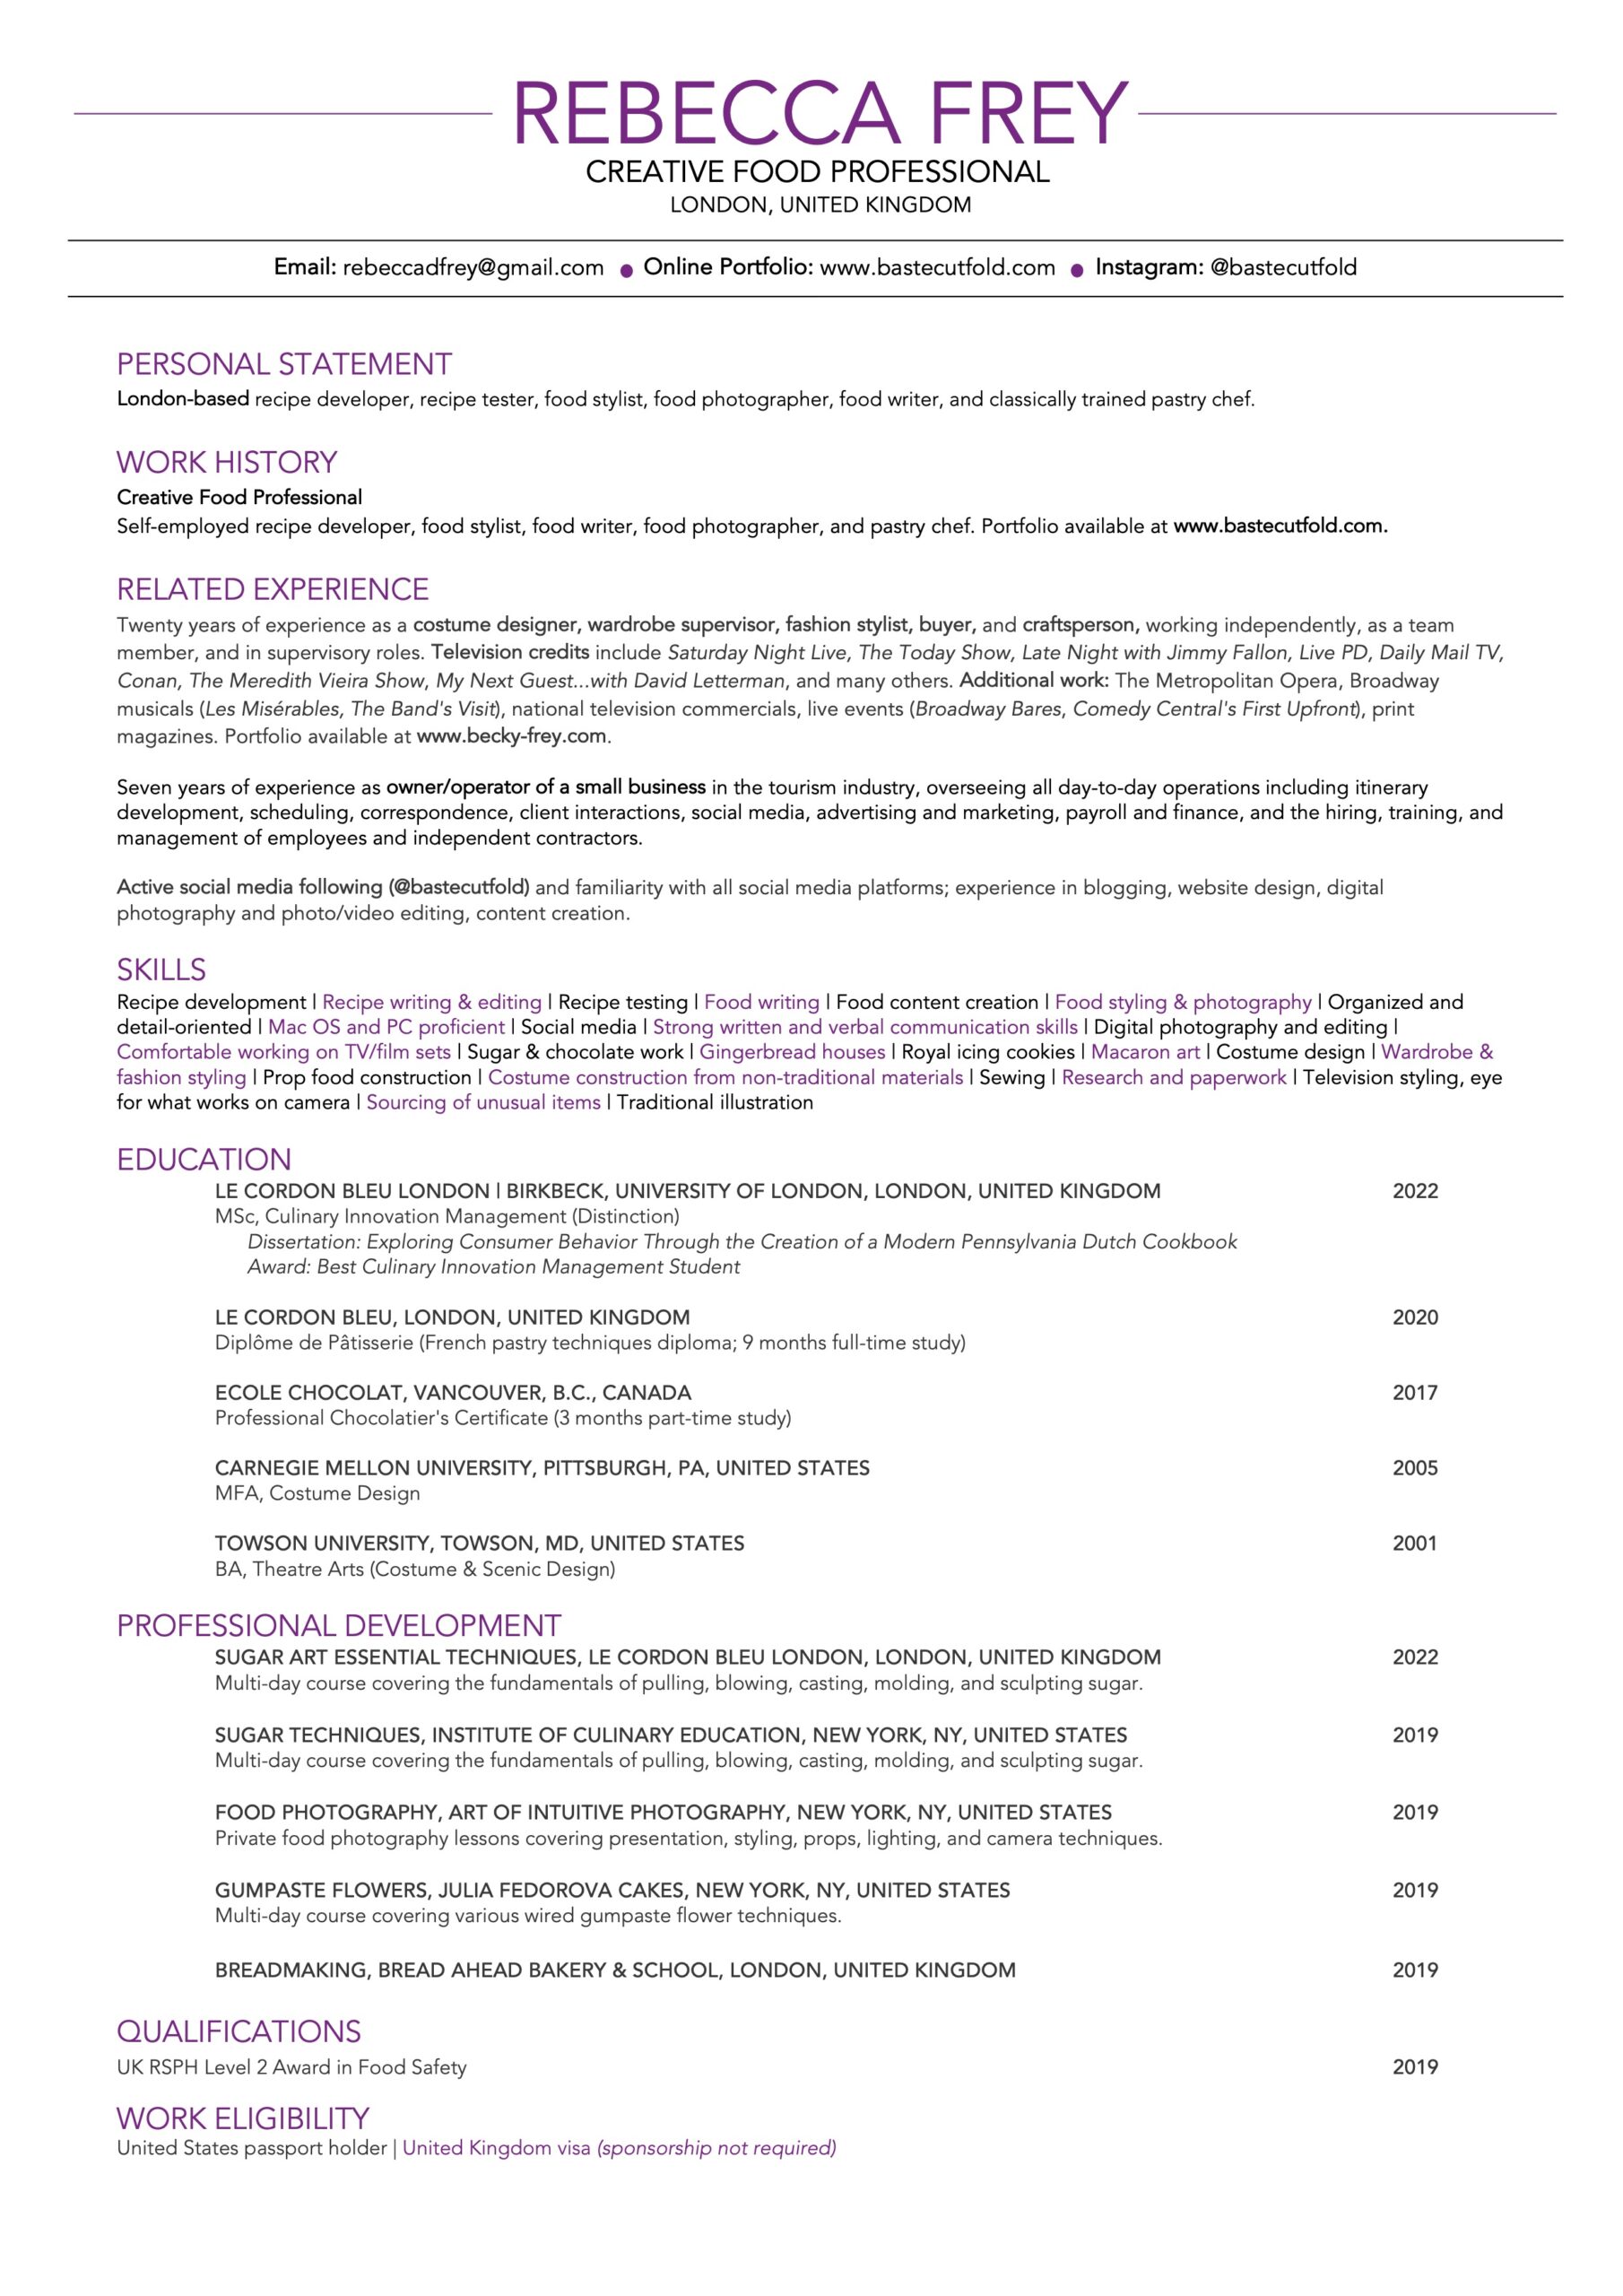 Resume for pastry chef, food writer, and recipe developer Rebecca Frey